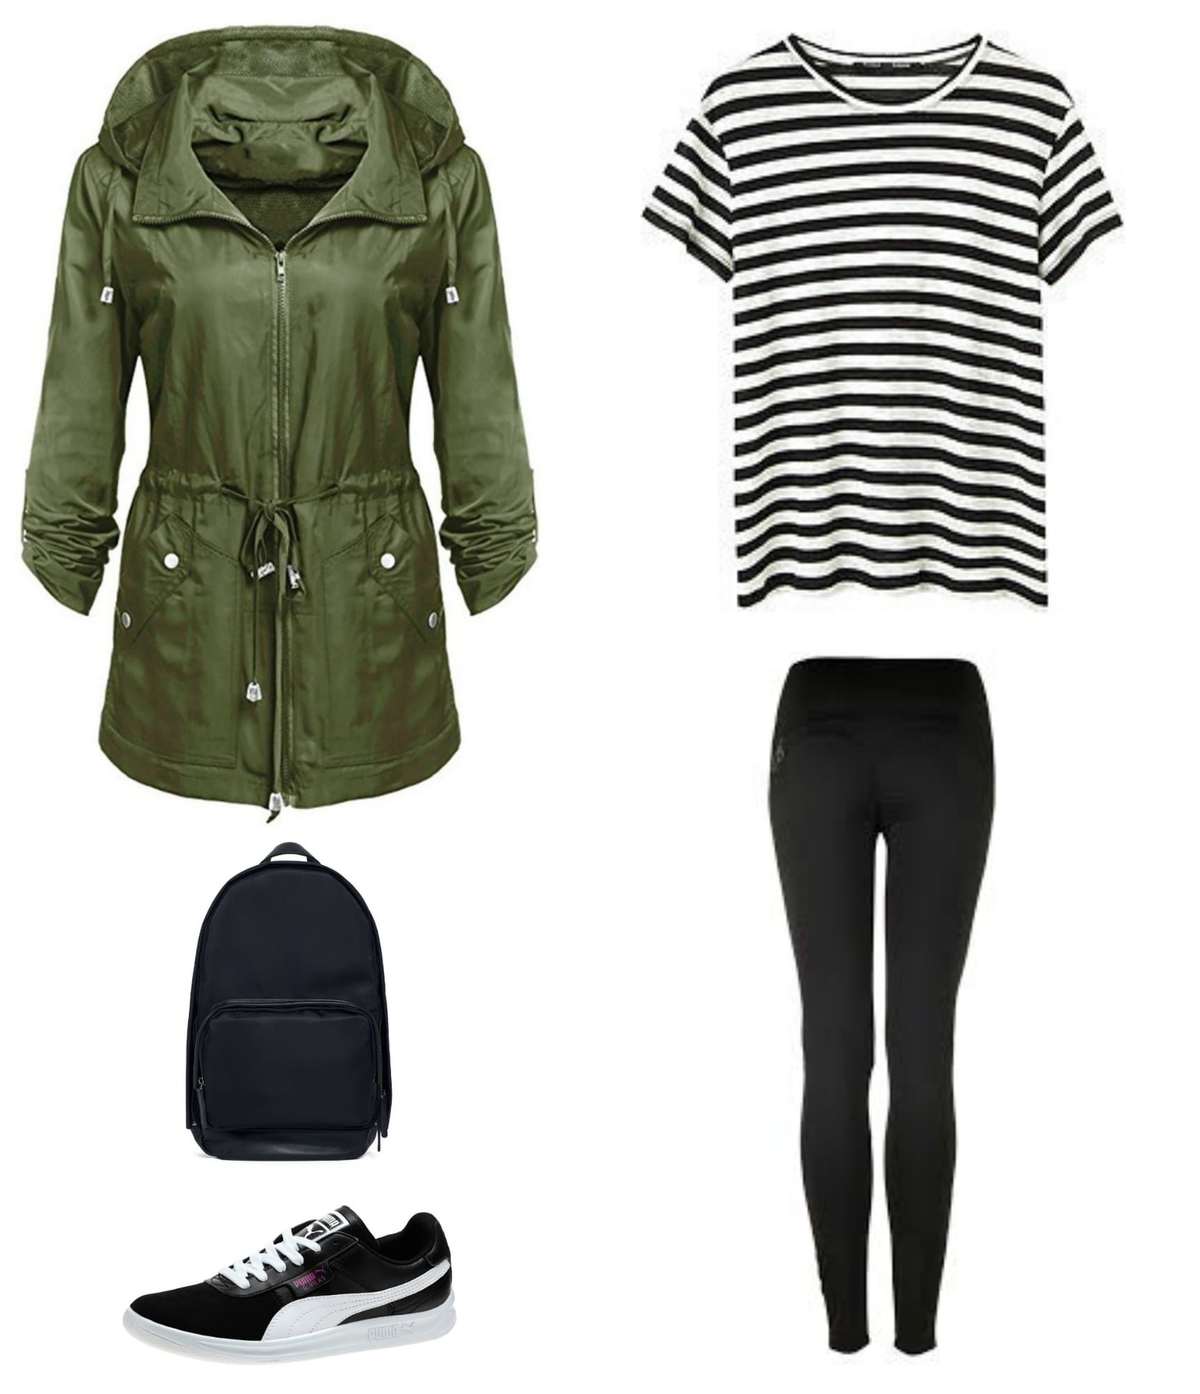 A casual travel capsule wardrobe look with black leggings, a black and white striped t-shirt, black Puma sneakers, backpack, and olive green hooded anorak.